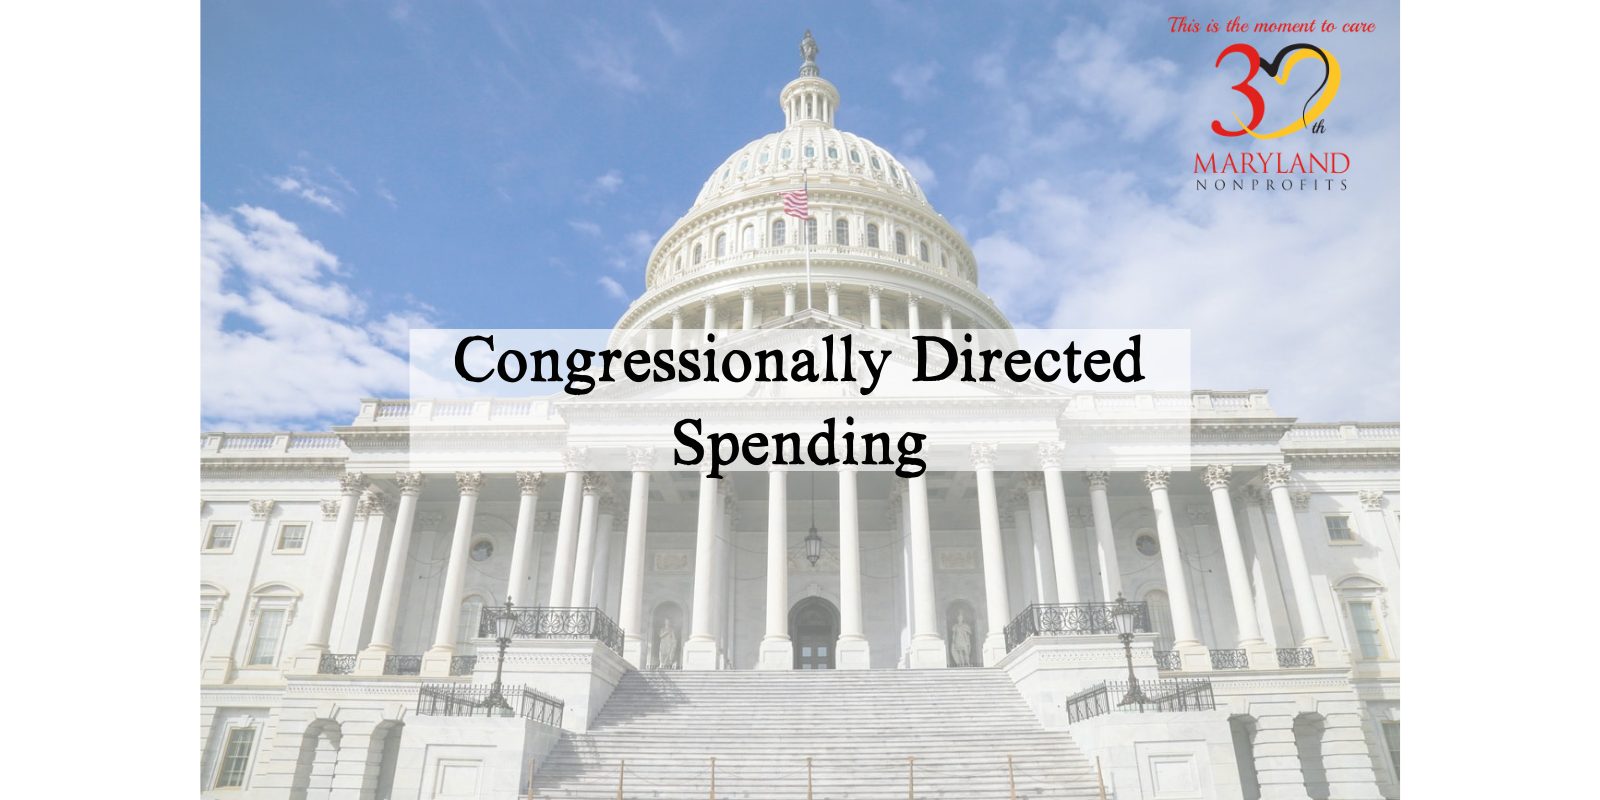 Congressionally directed spending